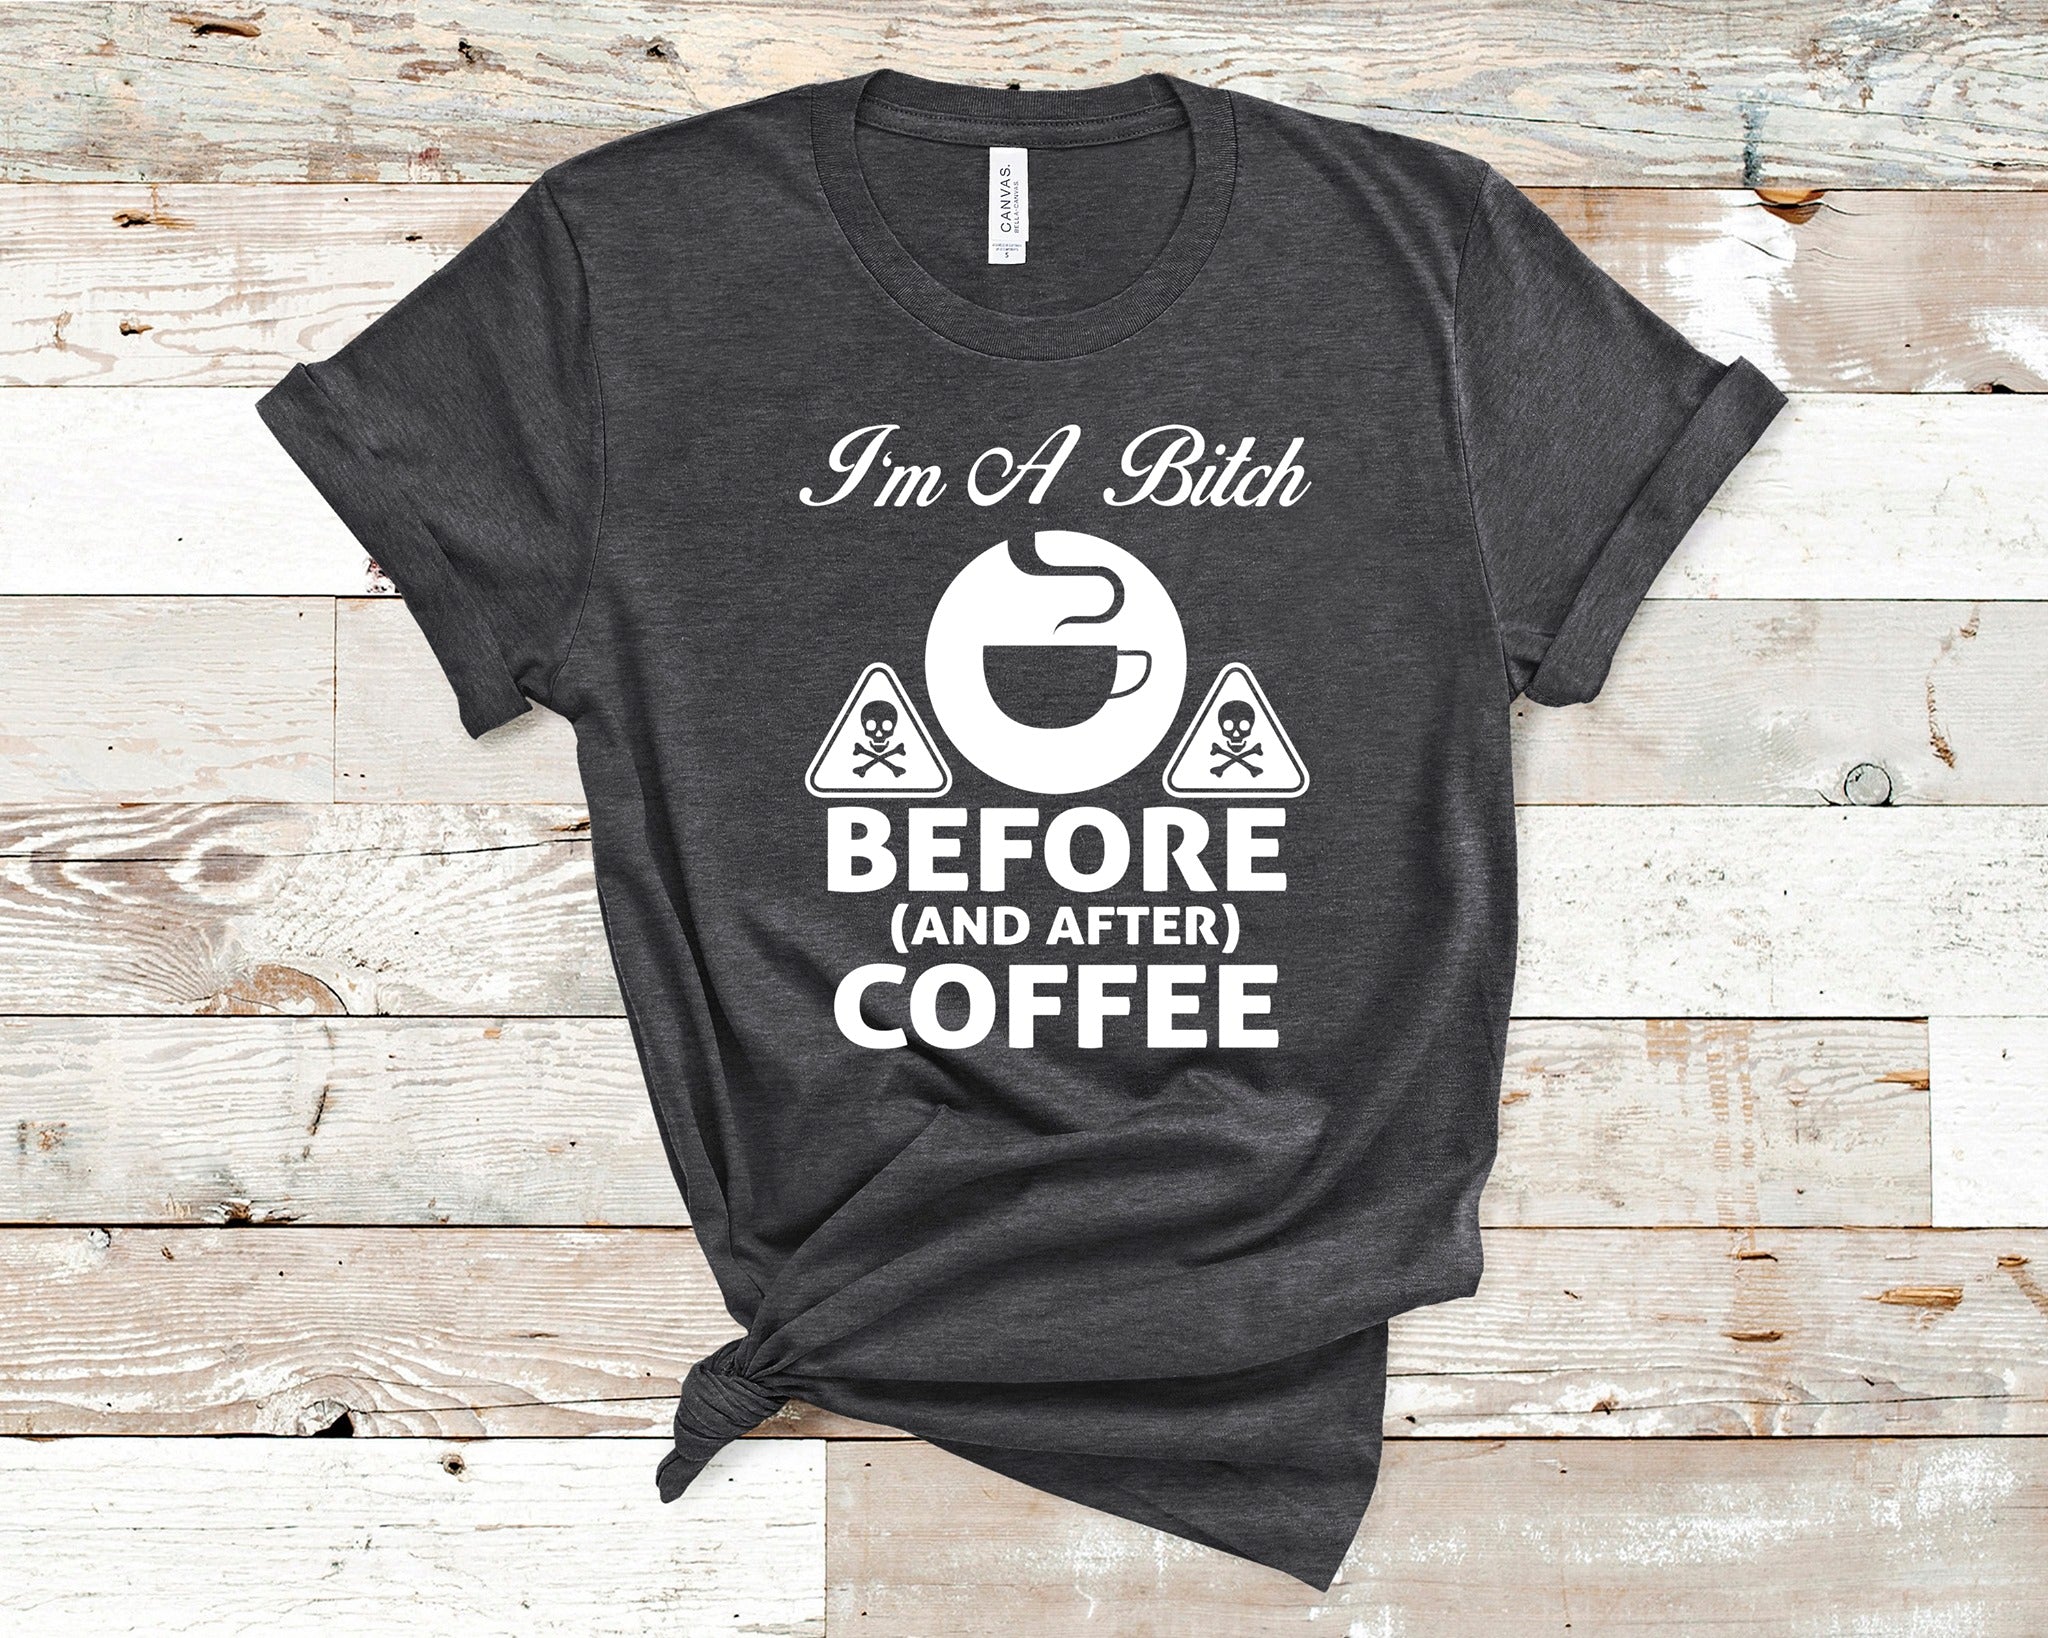 Before and After Coffee T-Shirt (Made to Order)